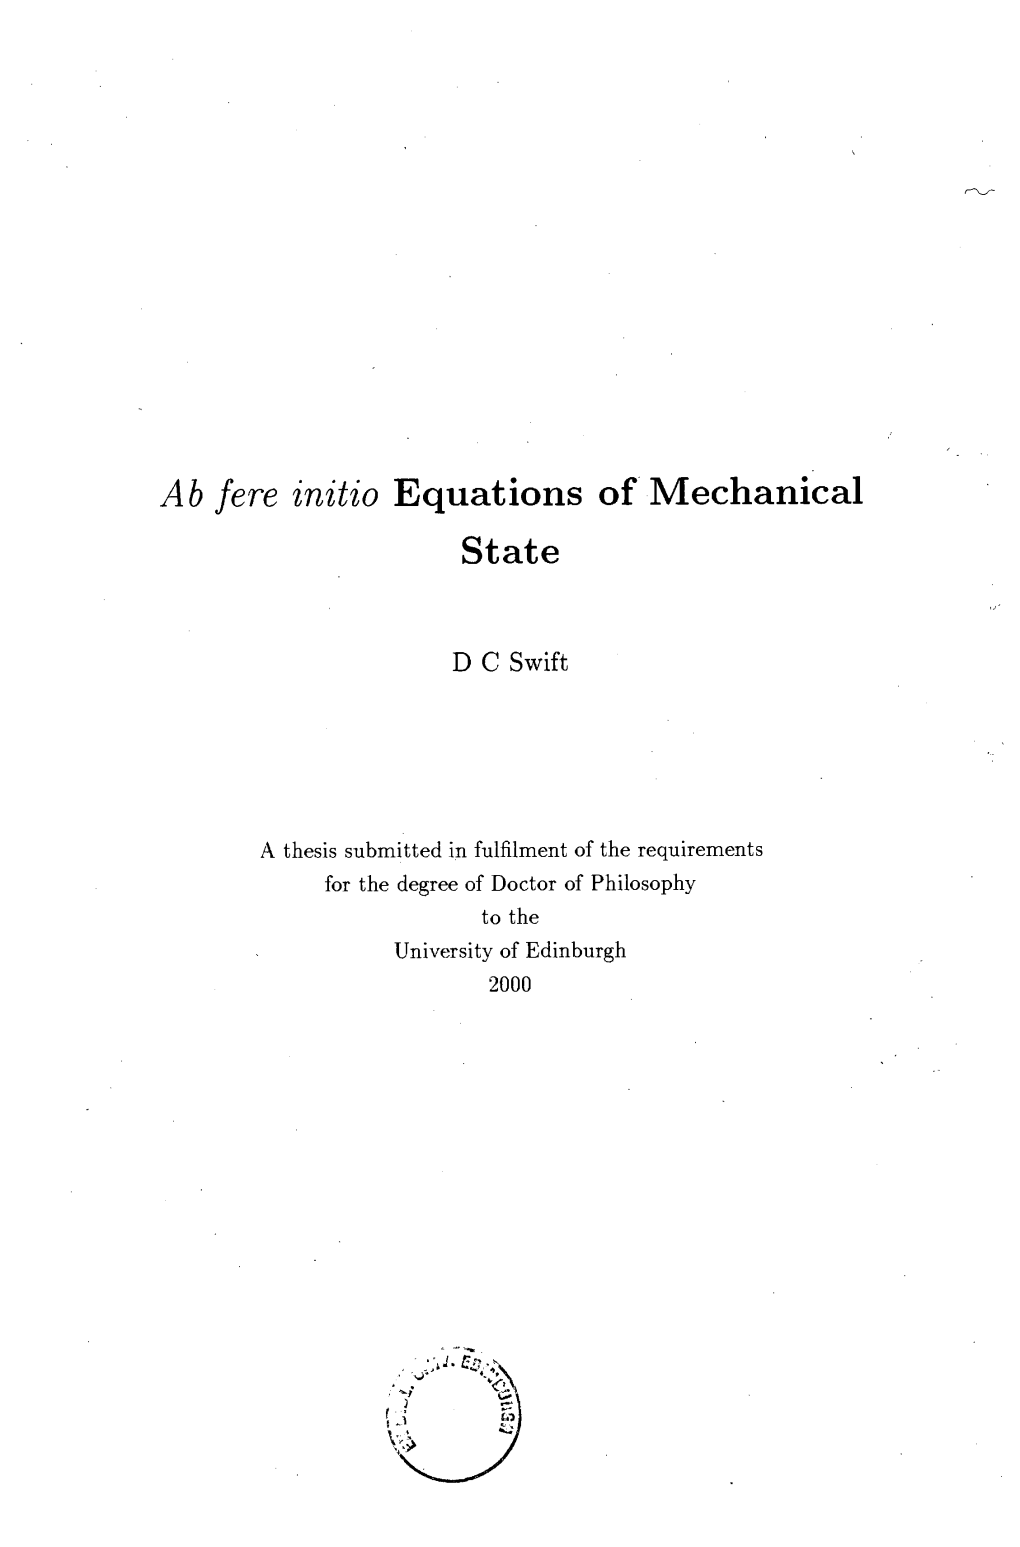 Ab Fere Initio Equations of Mechanical State